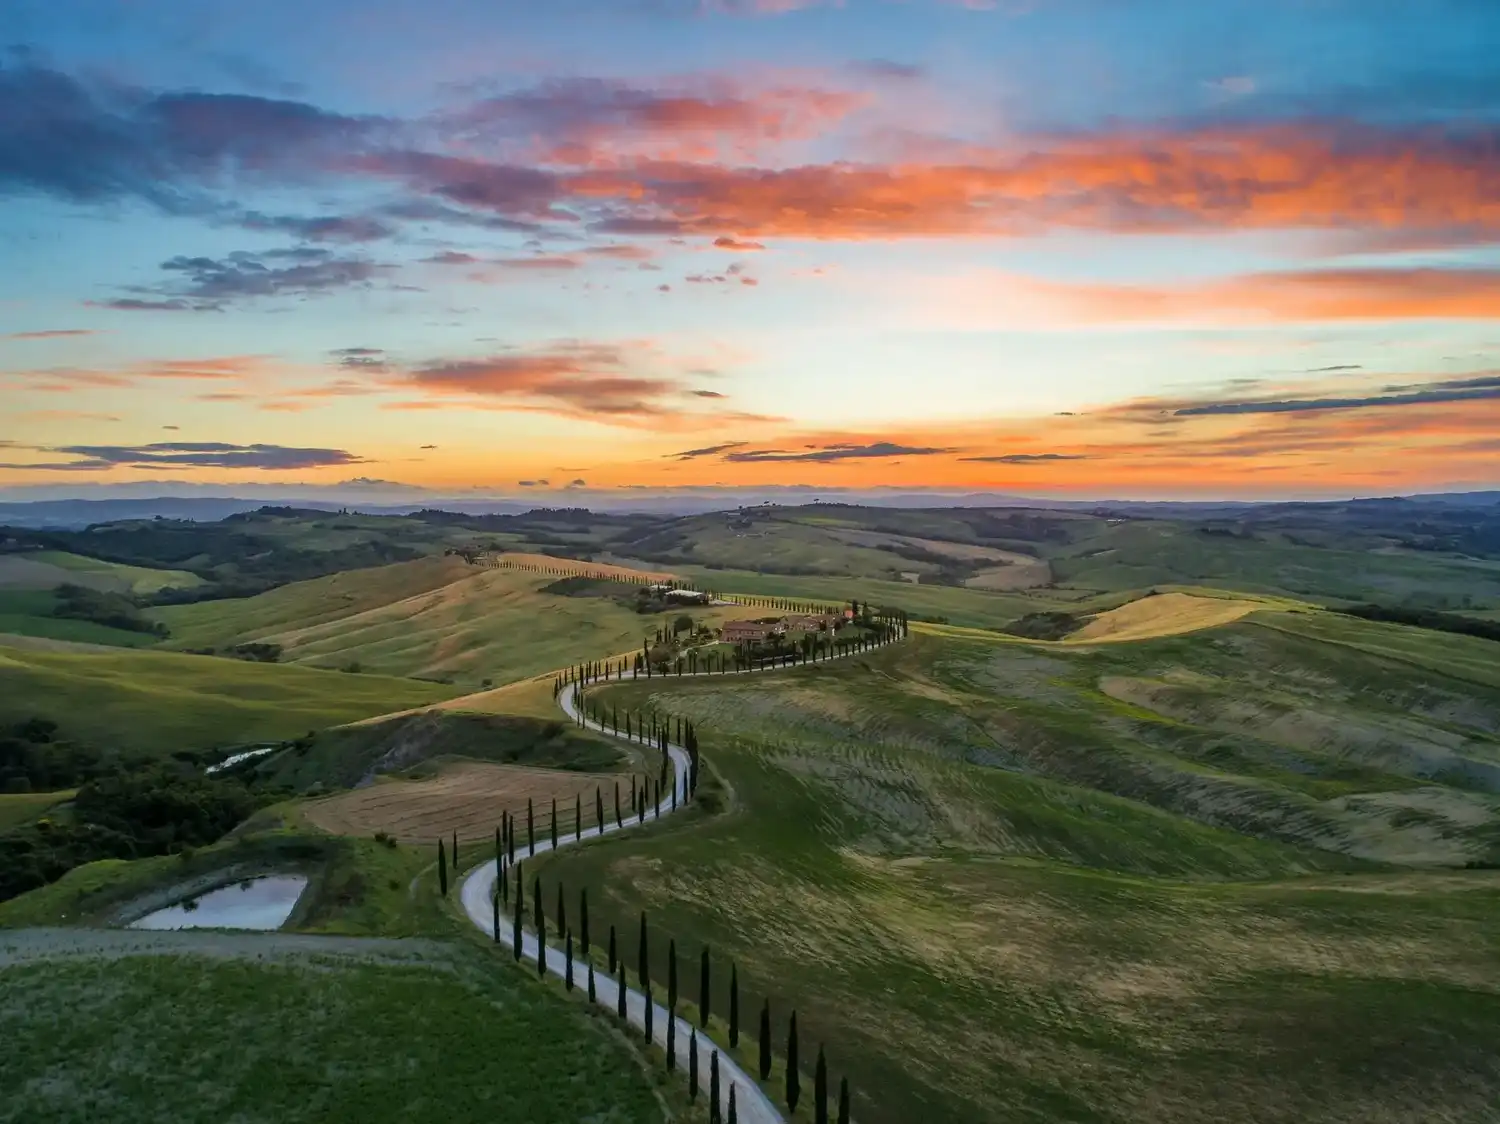 Tree-lined winding road through Tuscany countryside at sunset.